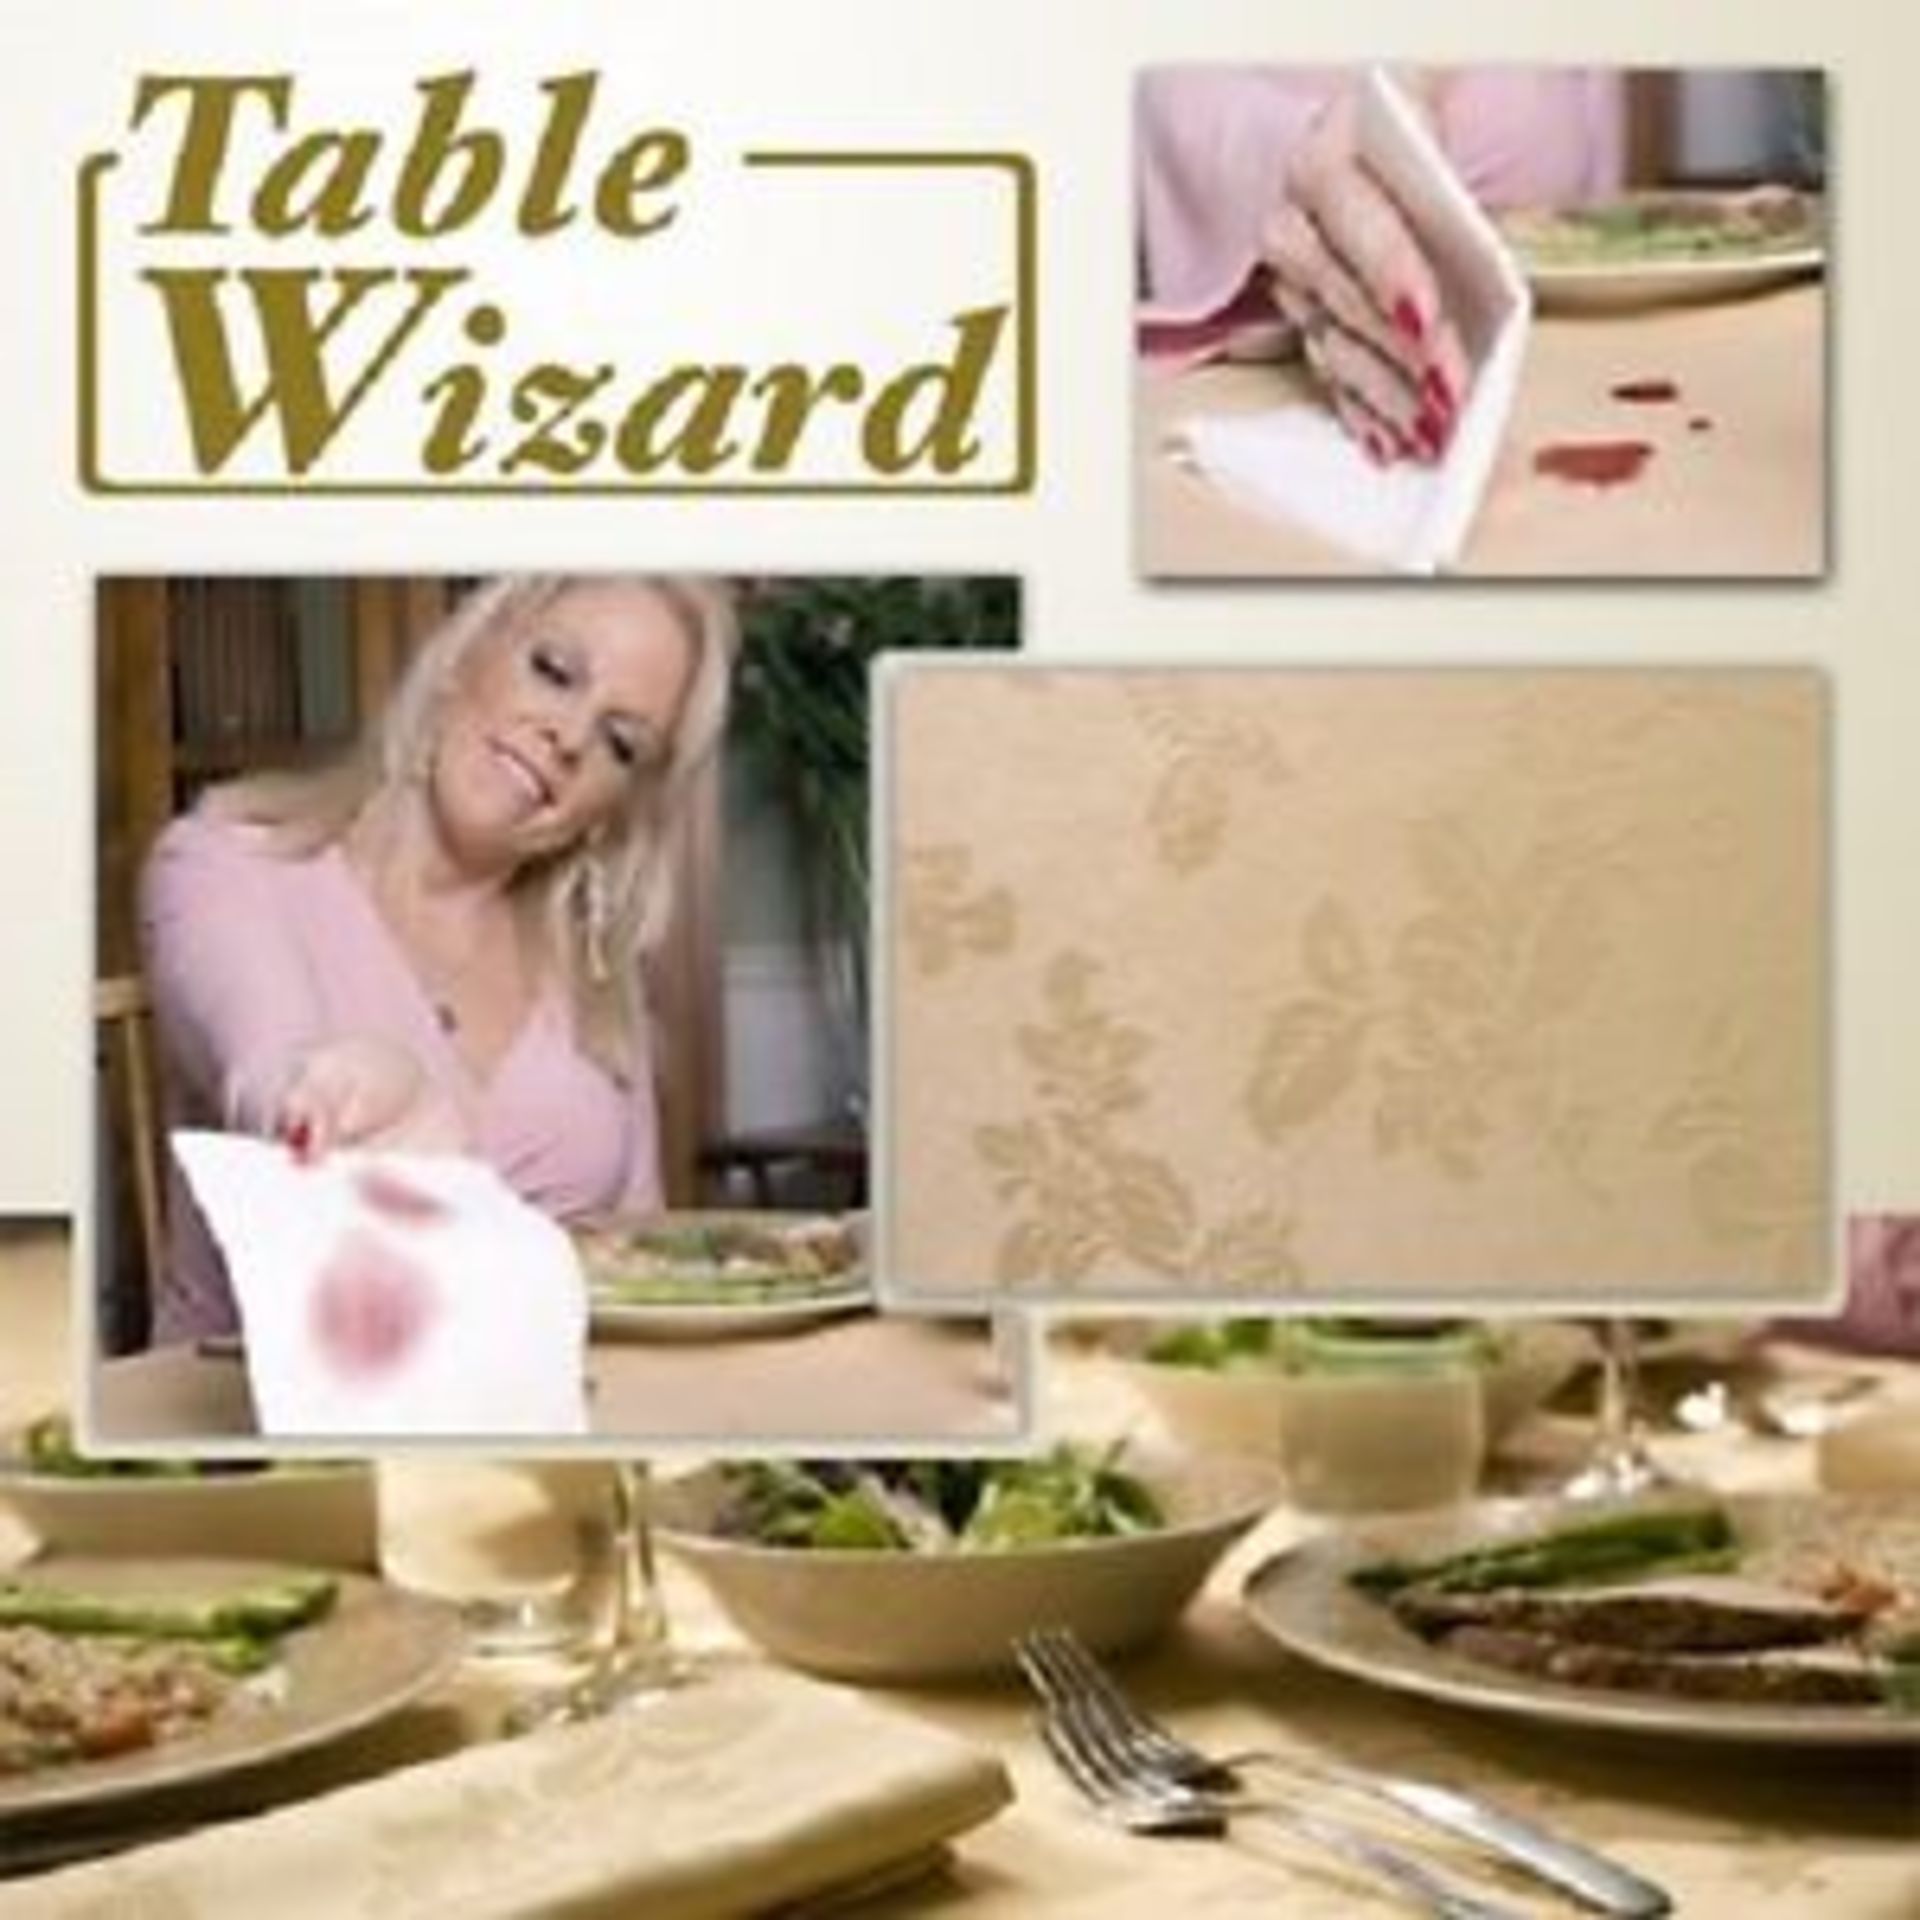 V Brand New Table Wizard luxurious stain resistant tablecloth Gold ISP £34.99 (islshop-UK) X 2